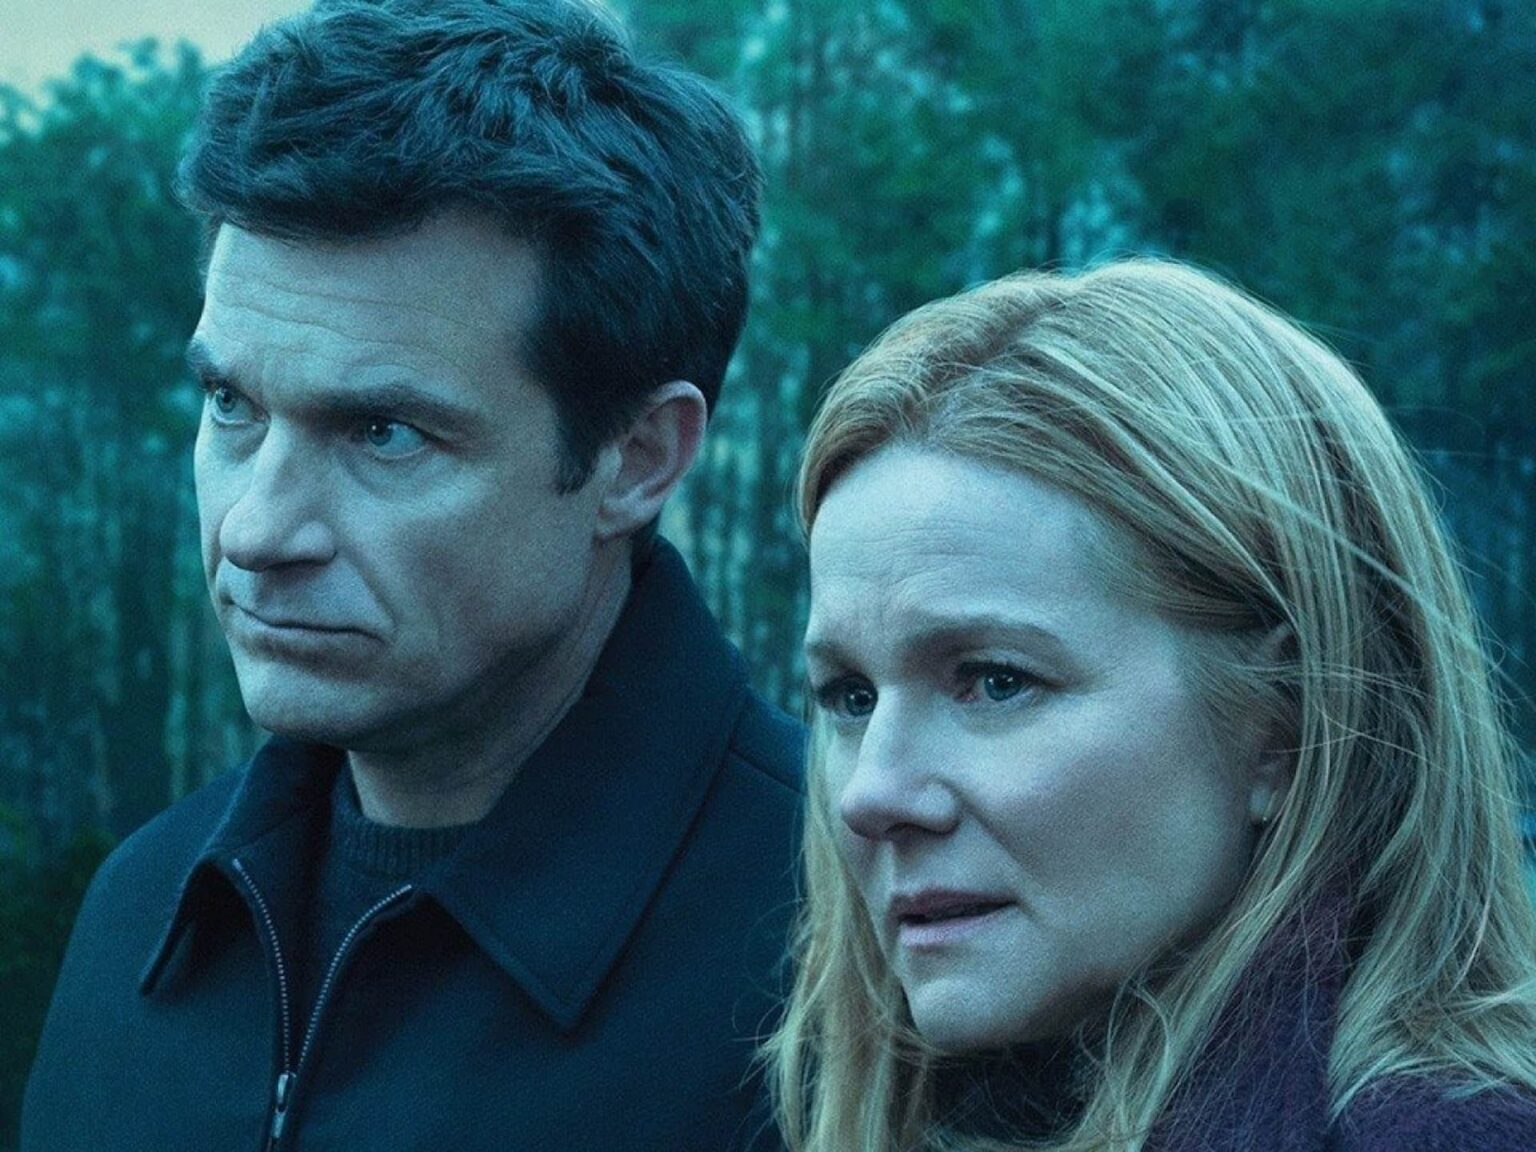 After a shocking season 3 finale, we're all dying to see what will happen next. When does season 4 of 'Ozark' start? Find out all the details here!